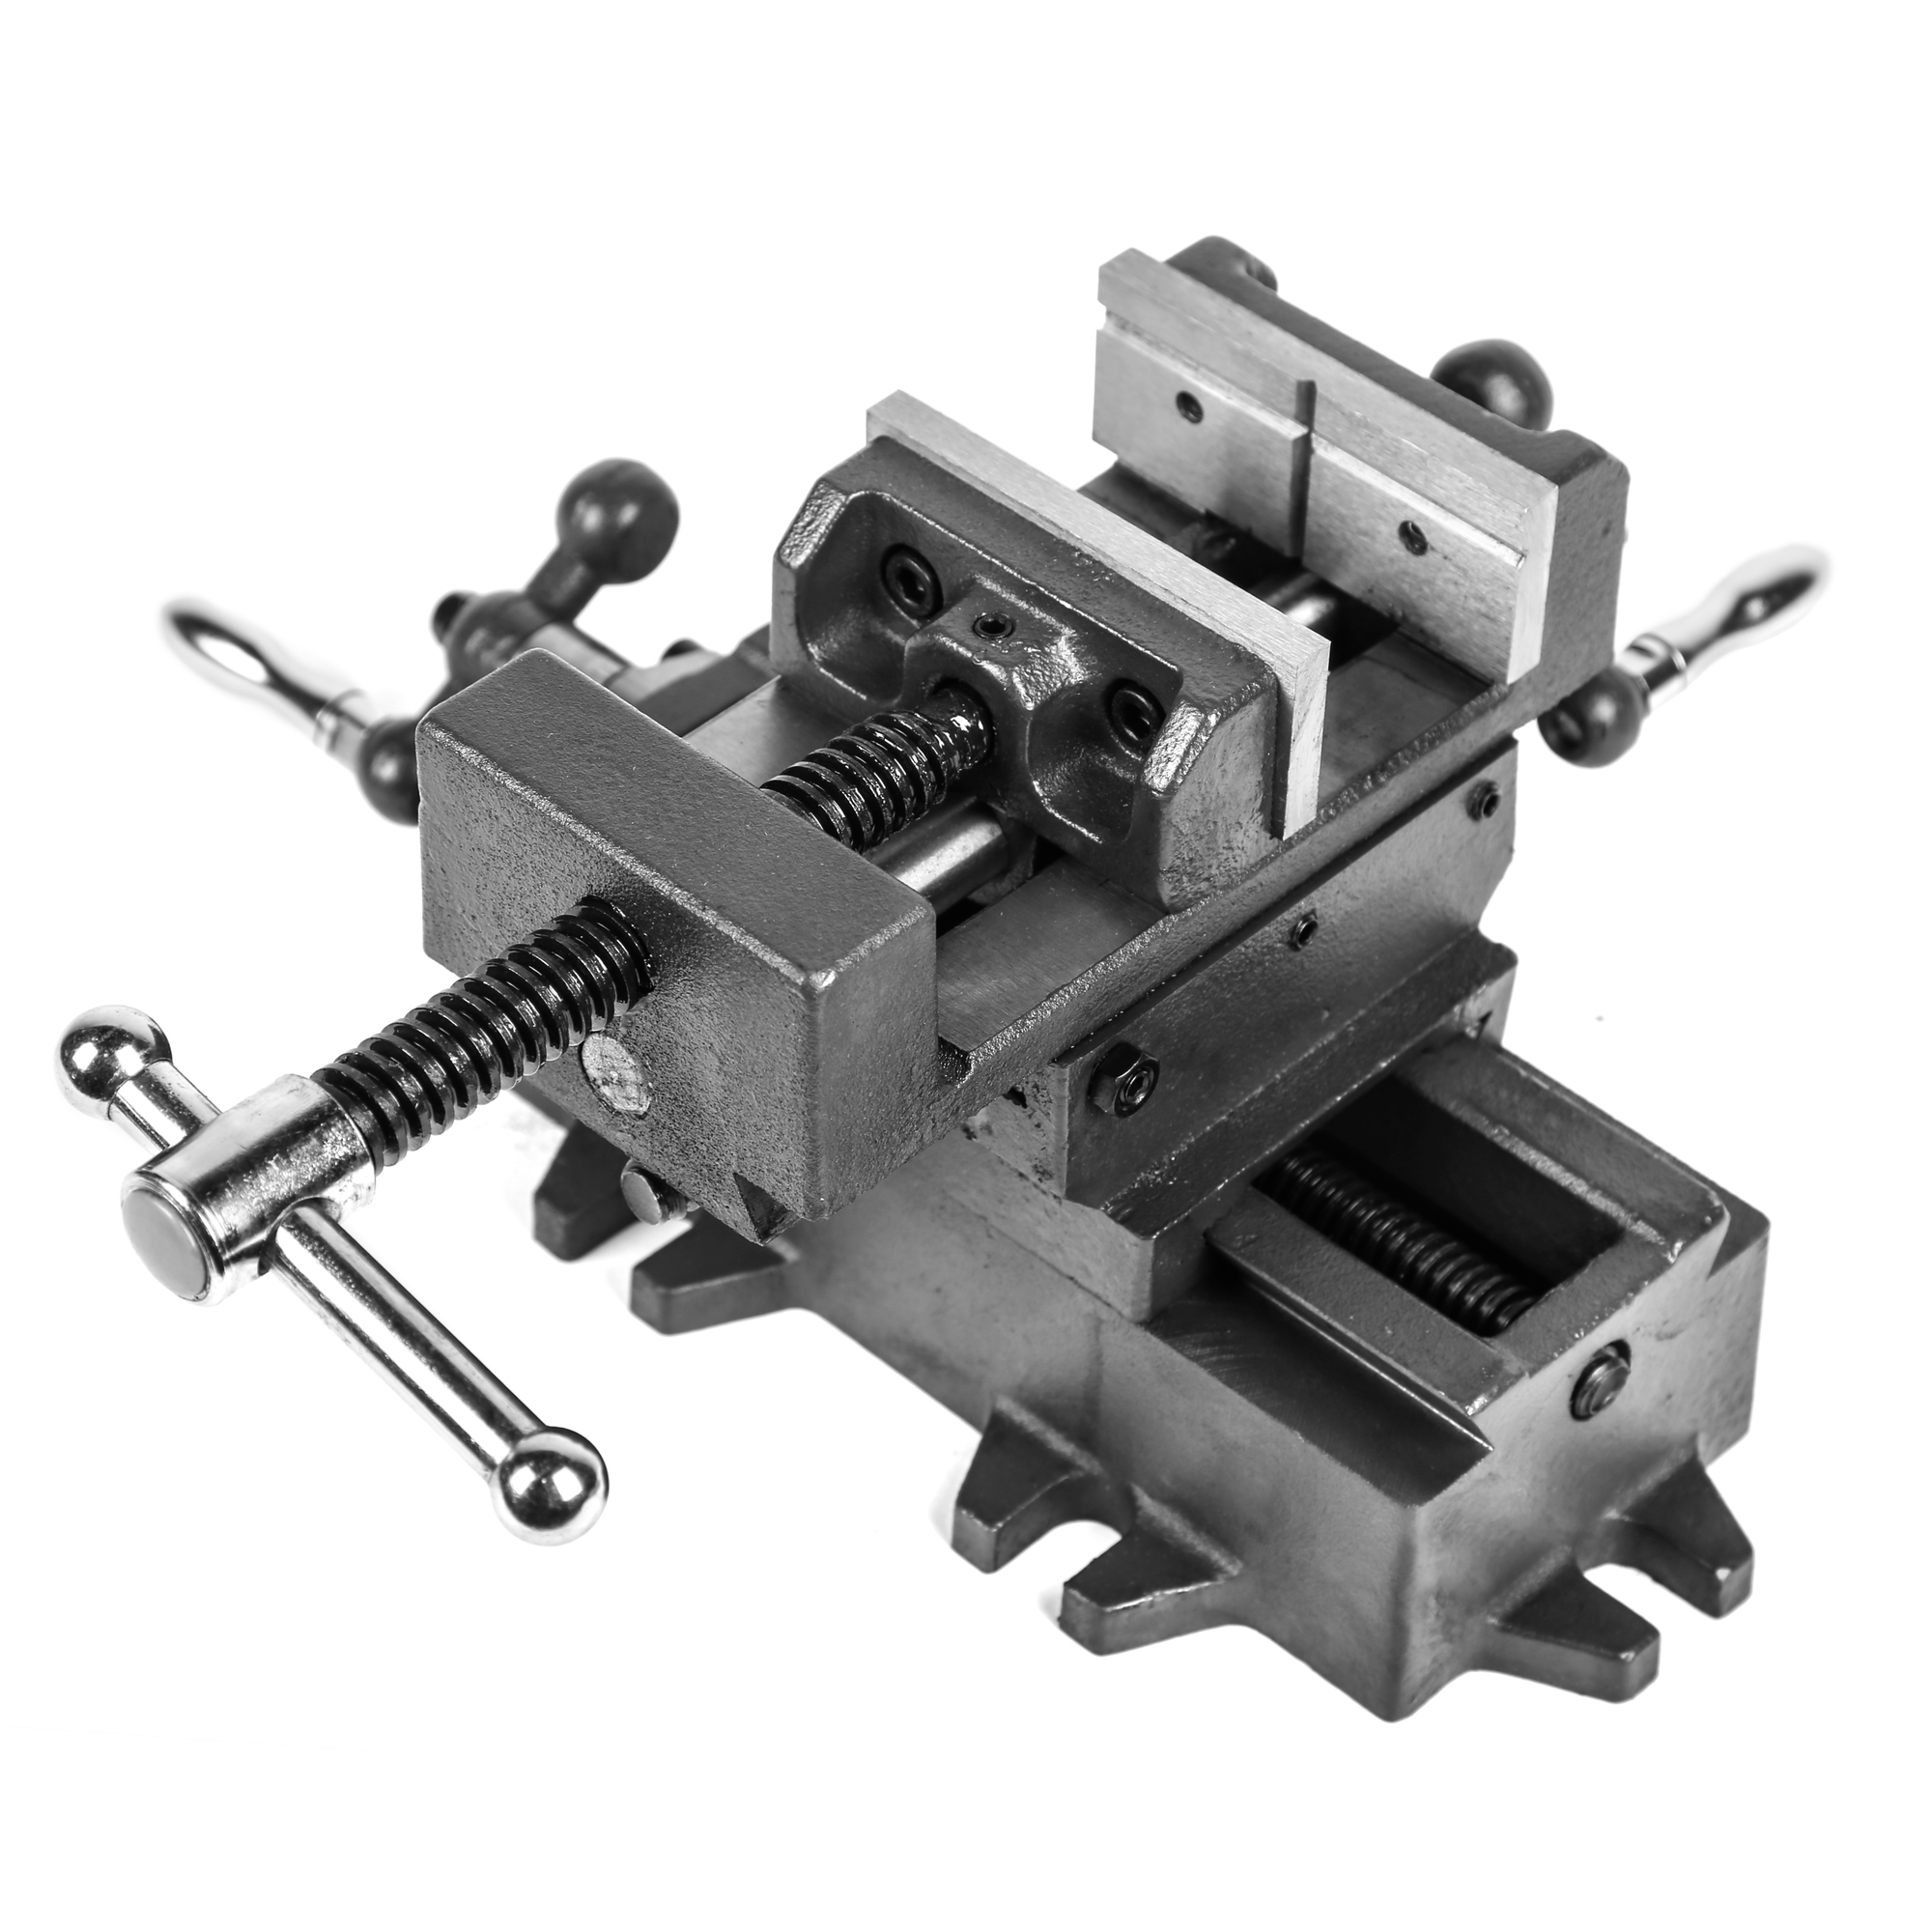 WEN, 3.25Inch Cross Slide Benchtop and Drill Press Vise, Jaw Width 3.25 in, Jaw Capacity 3.5 in, Material Cast Iron, Model CV413